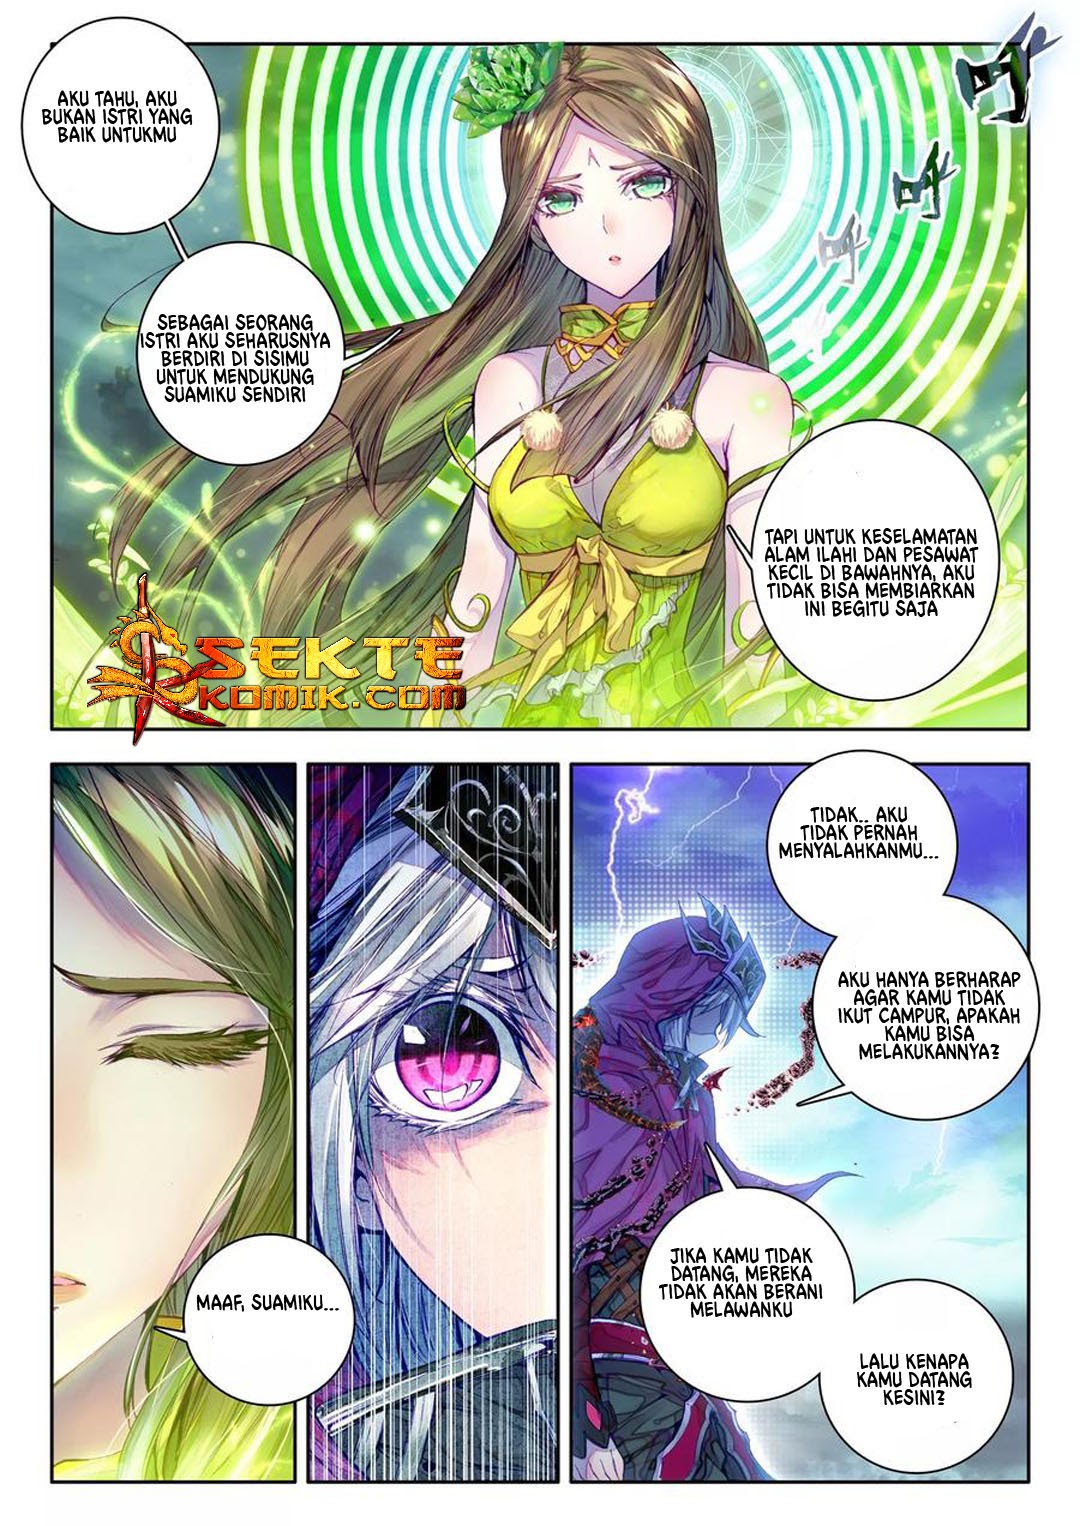 Soul Land – Legend of The Gods’ Realm Chapter 38.1